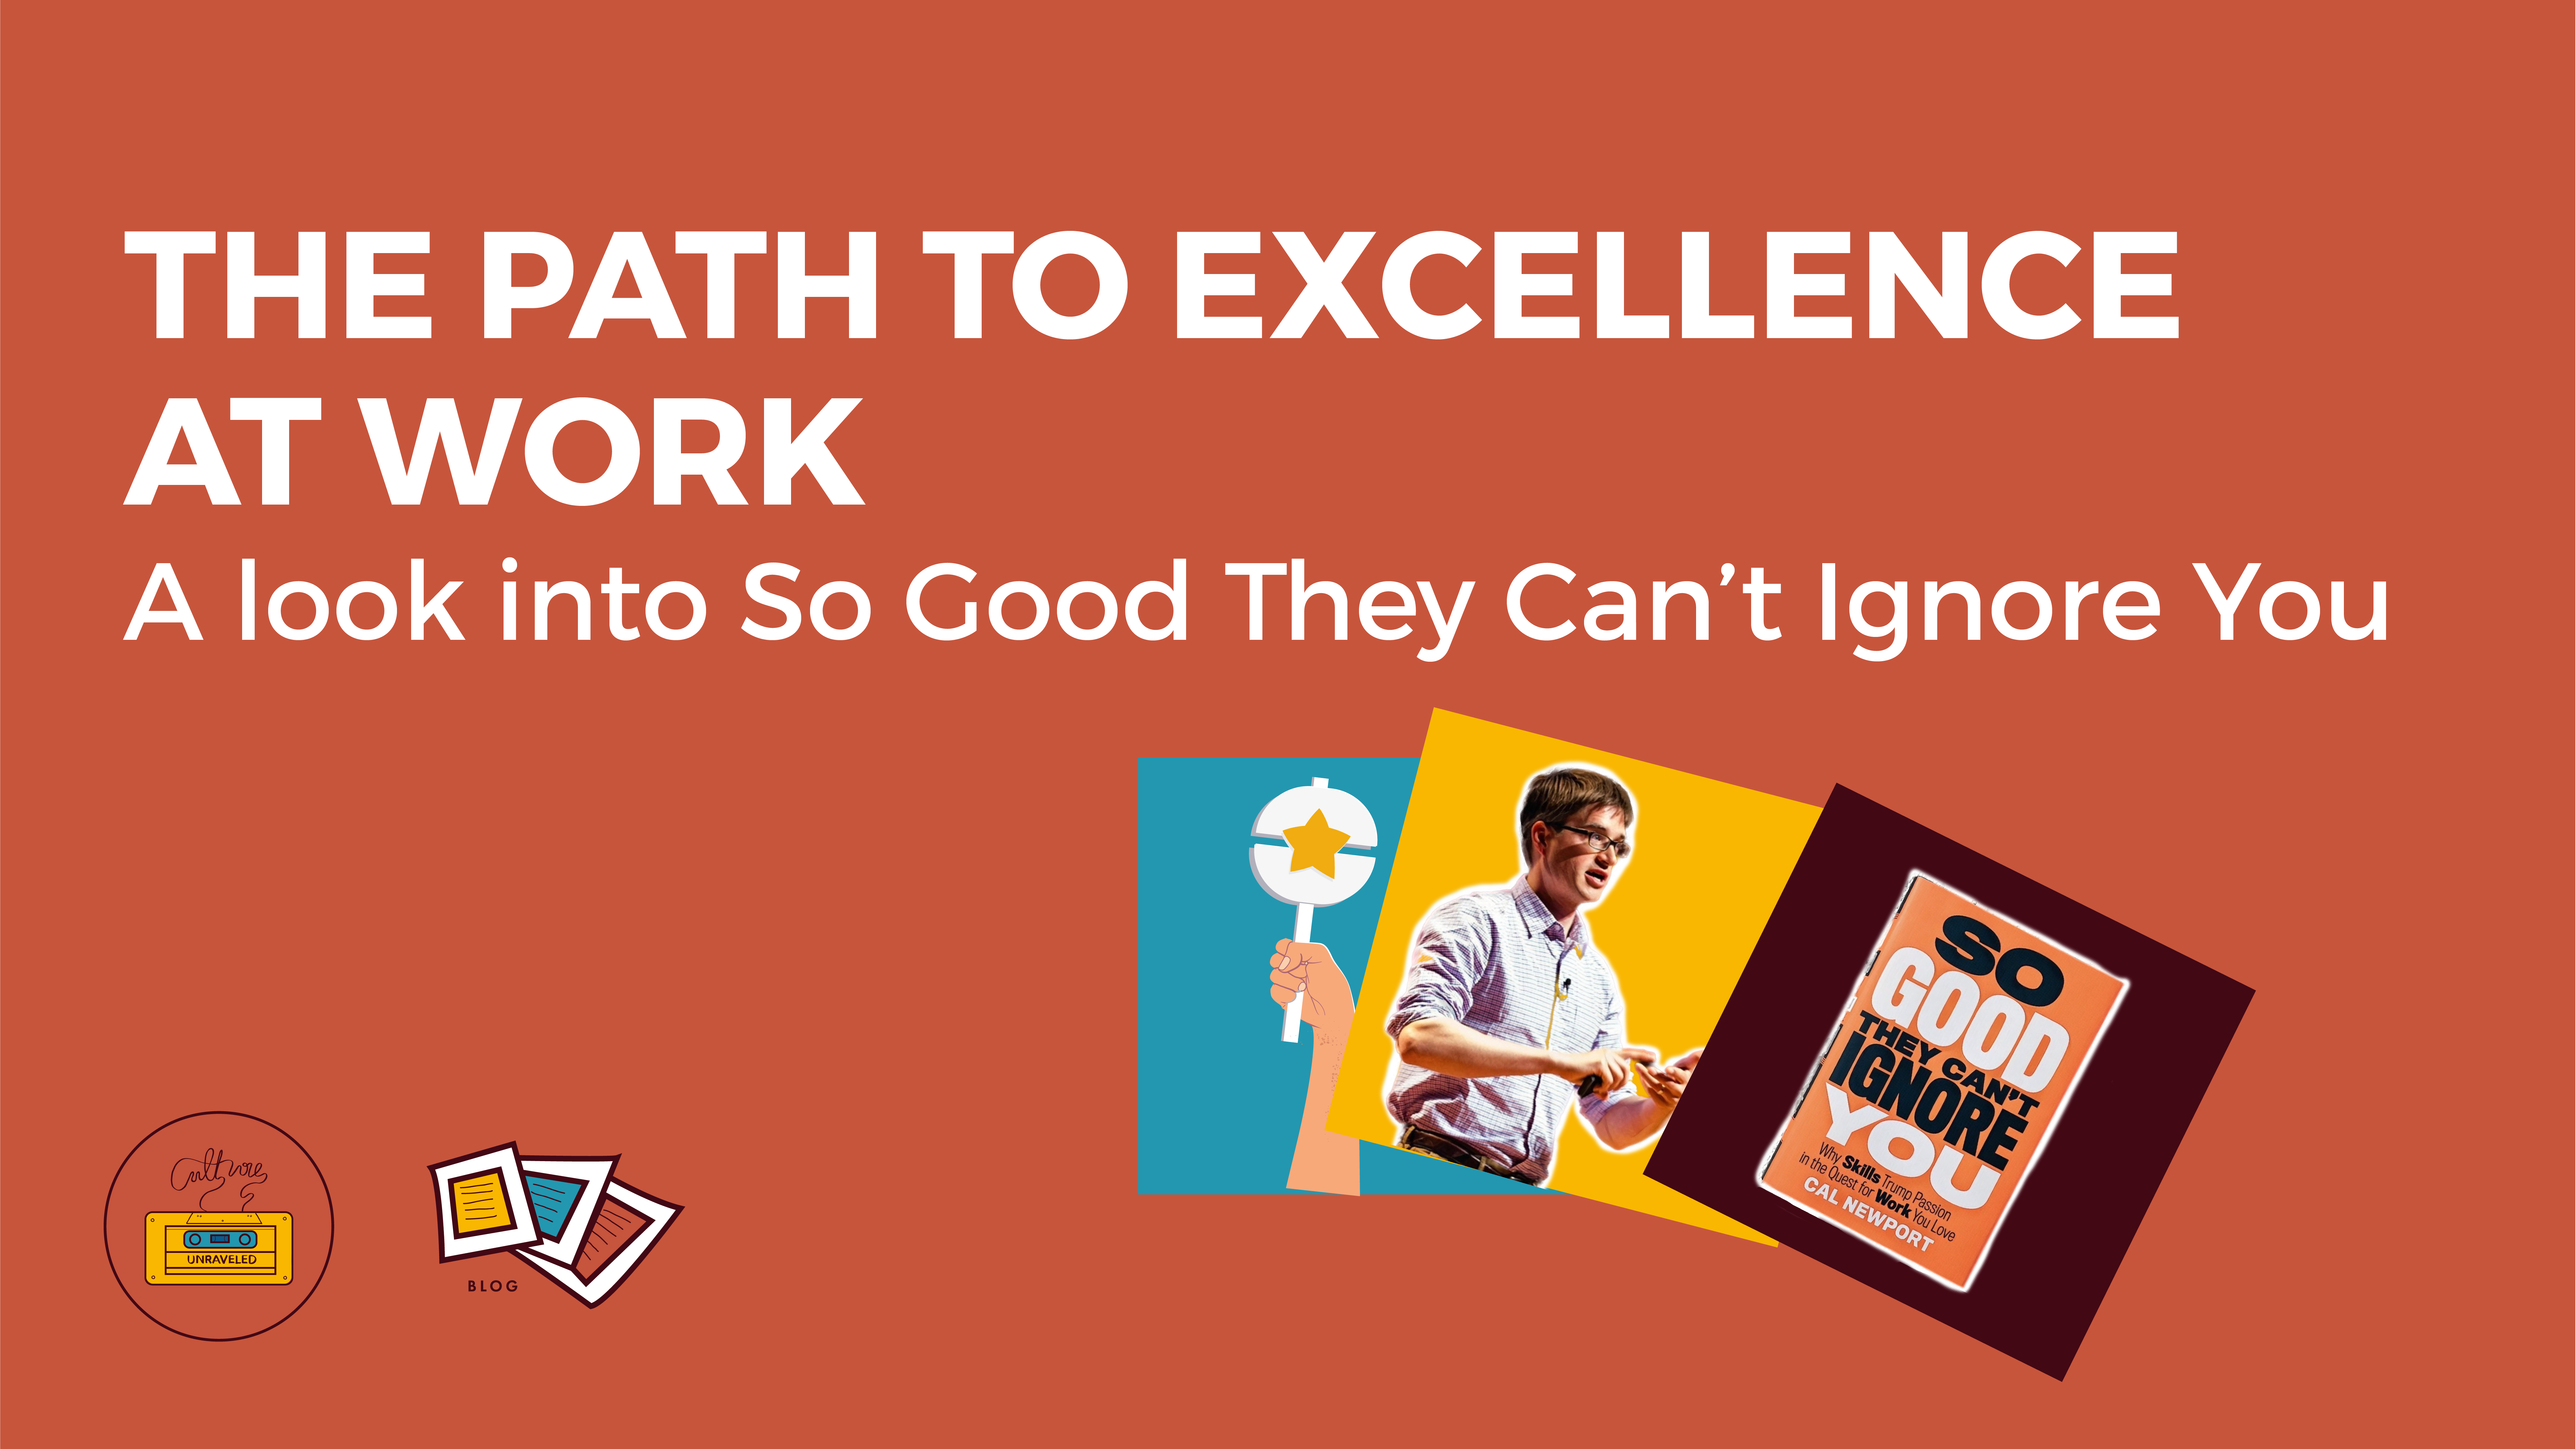 The path to excellence at work.  A look into So Good They Can’t Ignore You